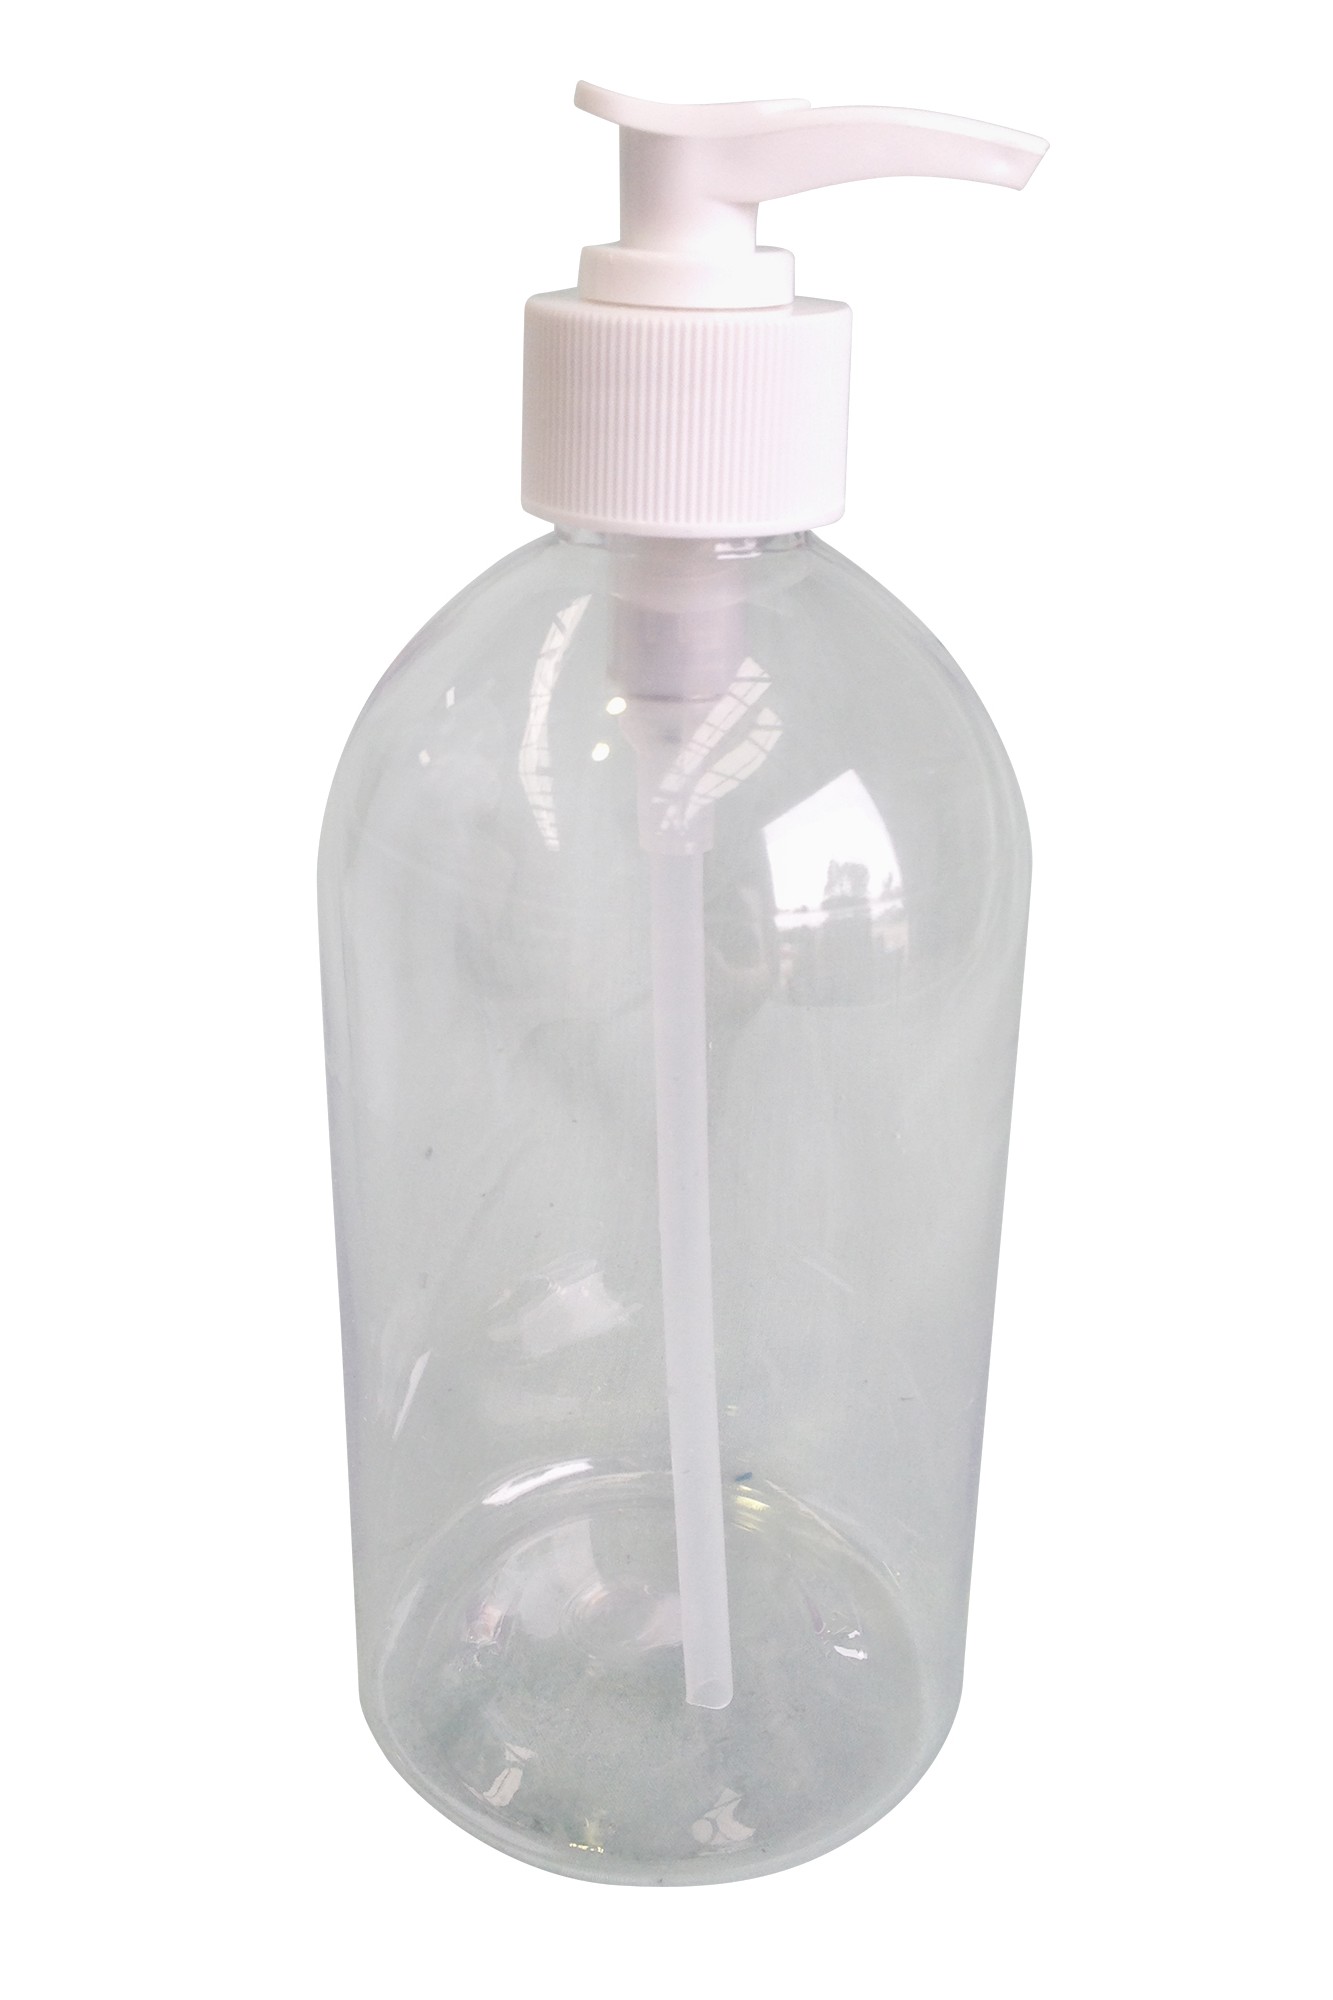 Hand Soap Bottle with Pump (500ml)